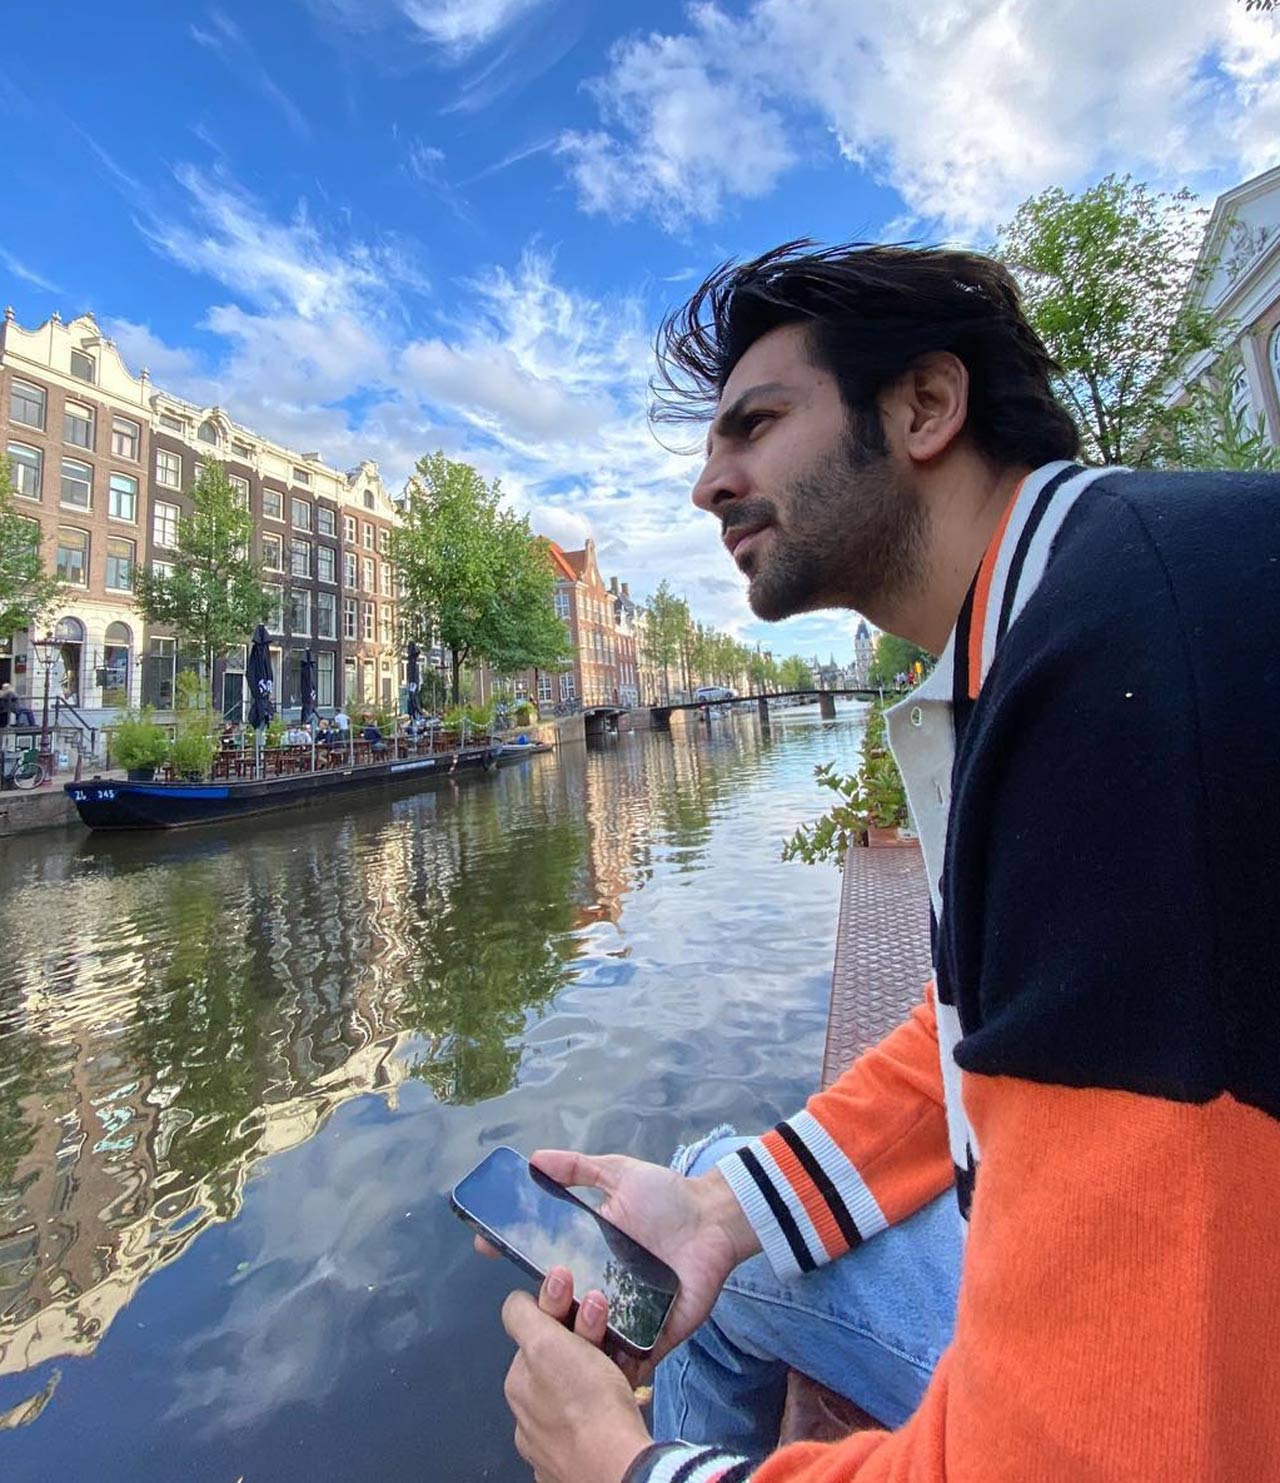 Kartik Aaryan is on cloud nine post the blockbuster success of 'Bhool Bhulaiyaa 2'. The actor has taken his team on a Euro trip for a vacation. He shared some pictures with his team on Instagram and wrote- 